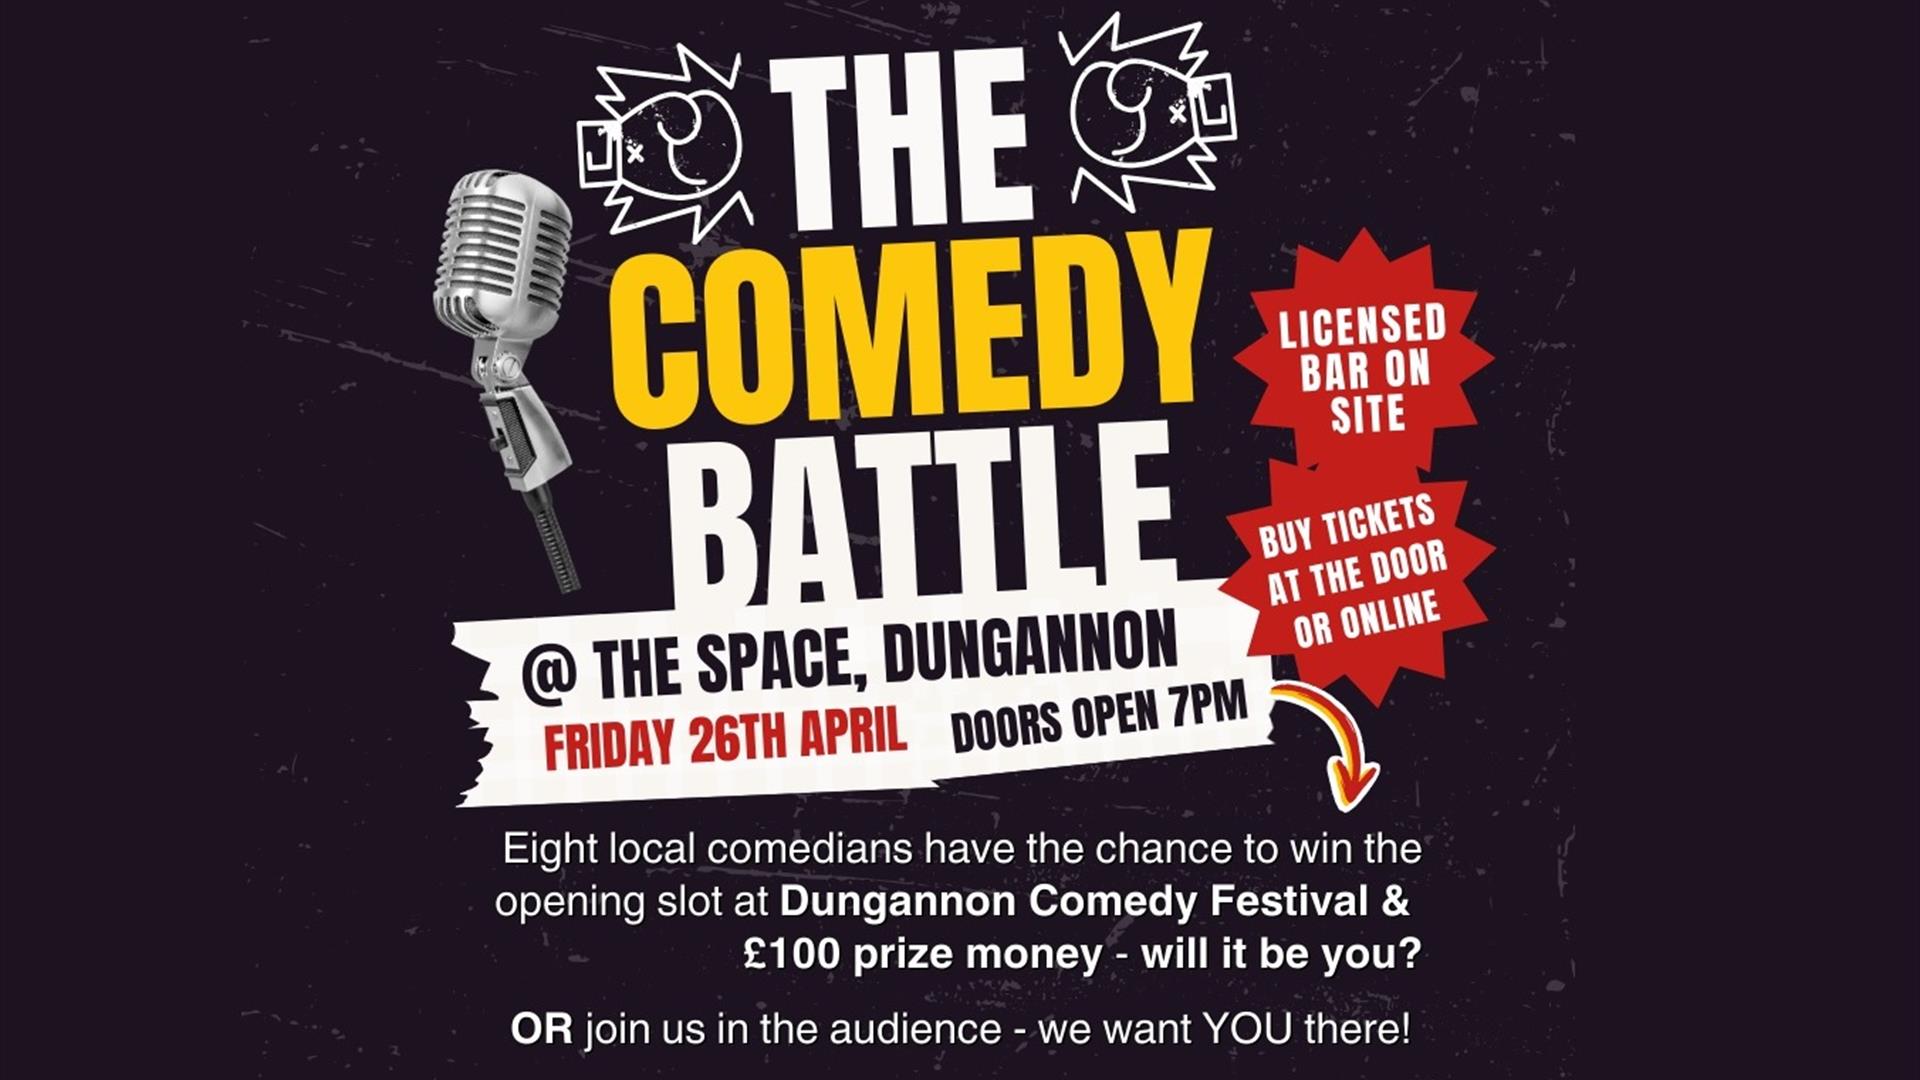 Image of advertisement of event for The Comedy Battle at the Space at the Market Square, Dungannon